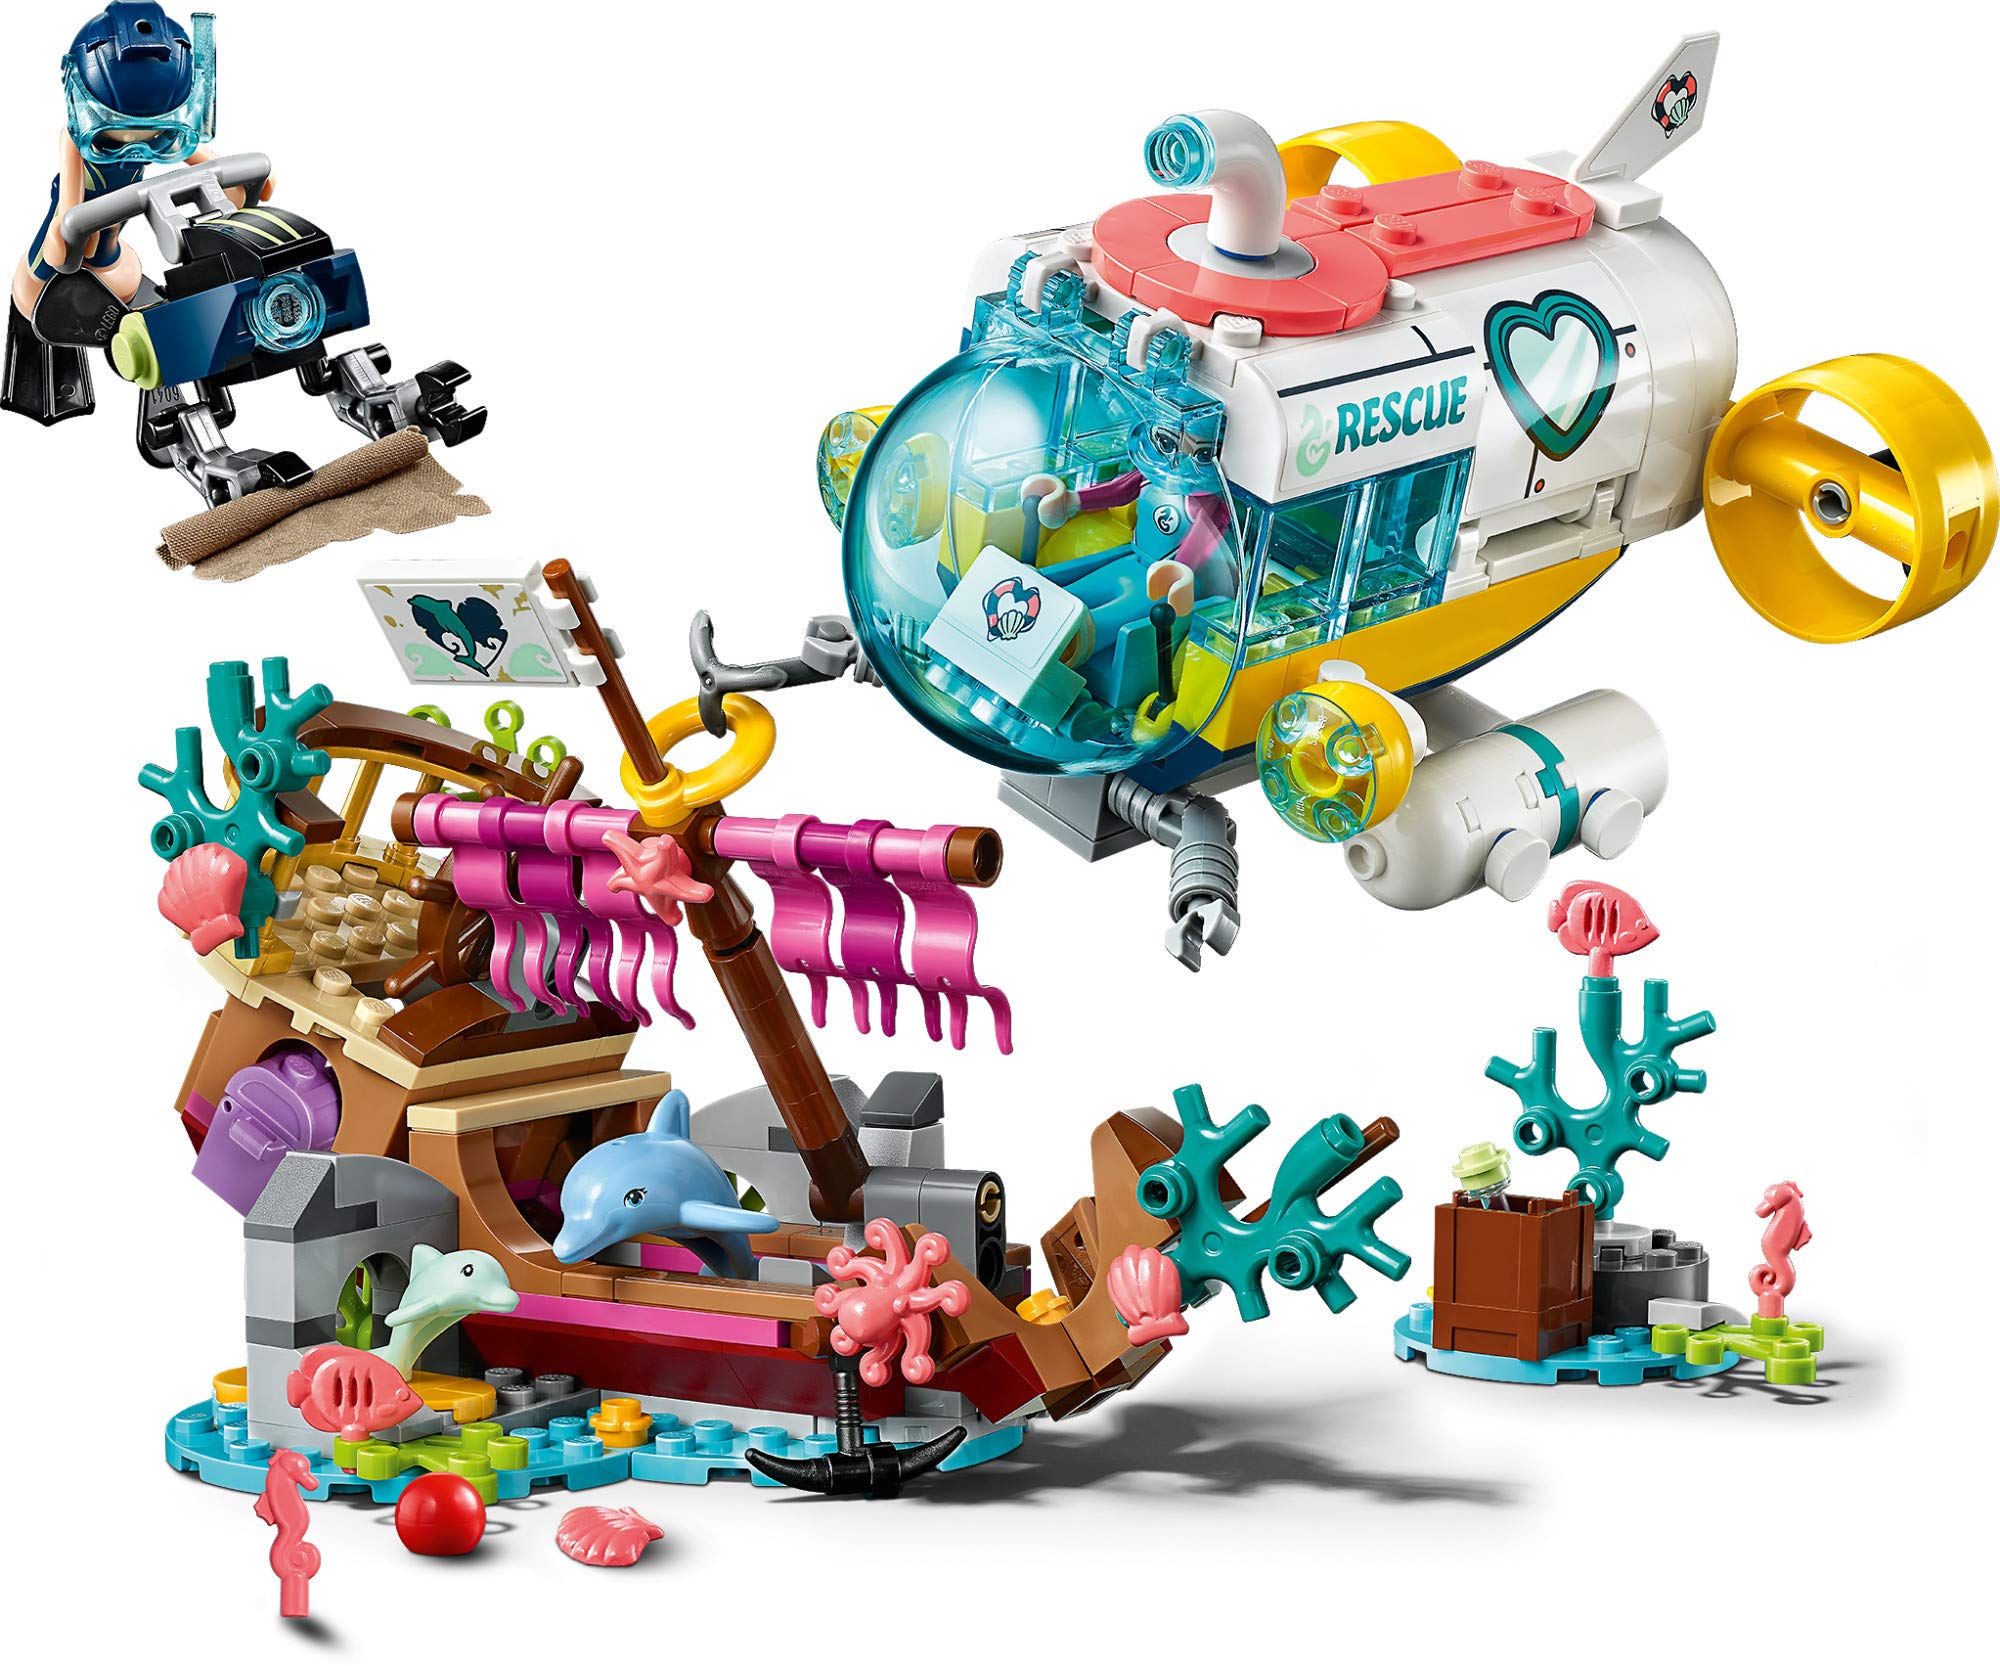 LEGO Friends Dolphins Rescue Mission 41378 Building Kit with Toy Submarine and Sea Creatures, Fun Sea Life Playset with Kacey and Stephanie Minifigures for Group Play (363 Pieces)